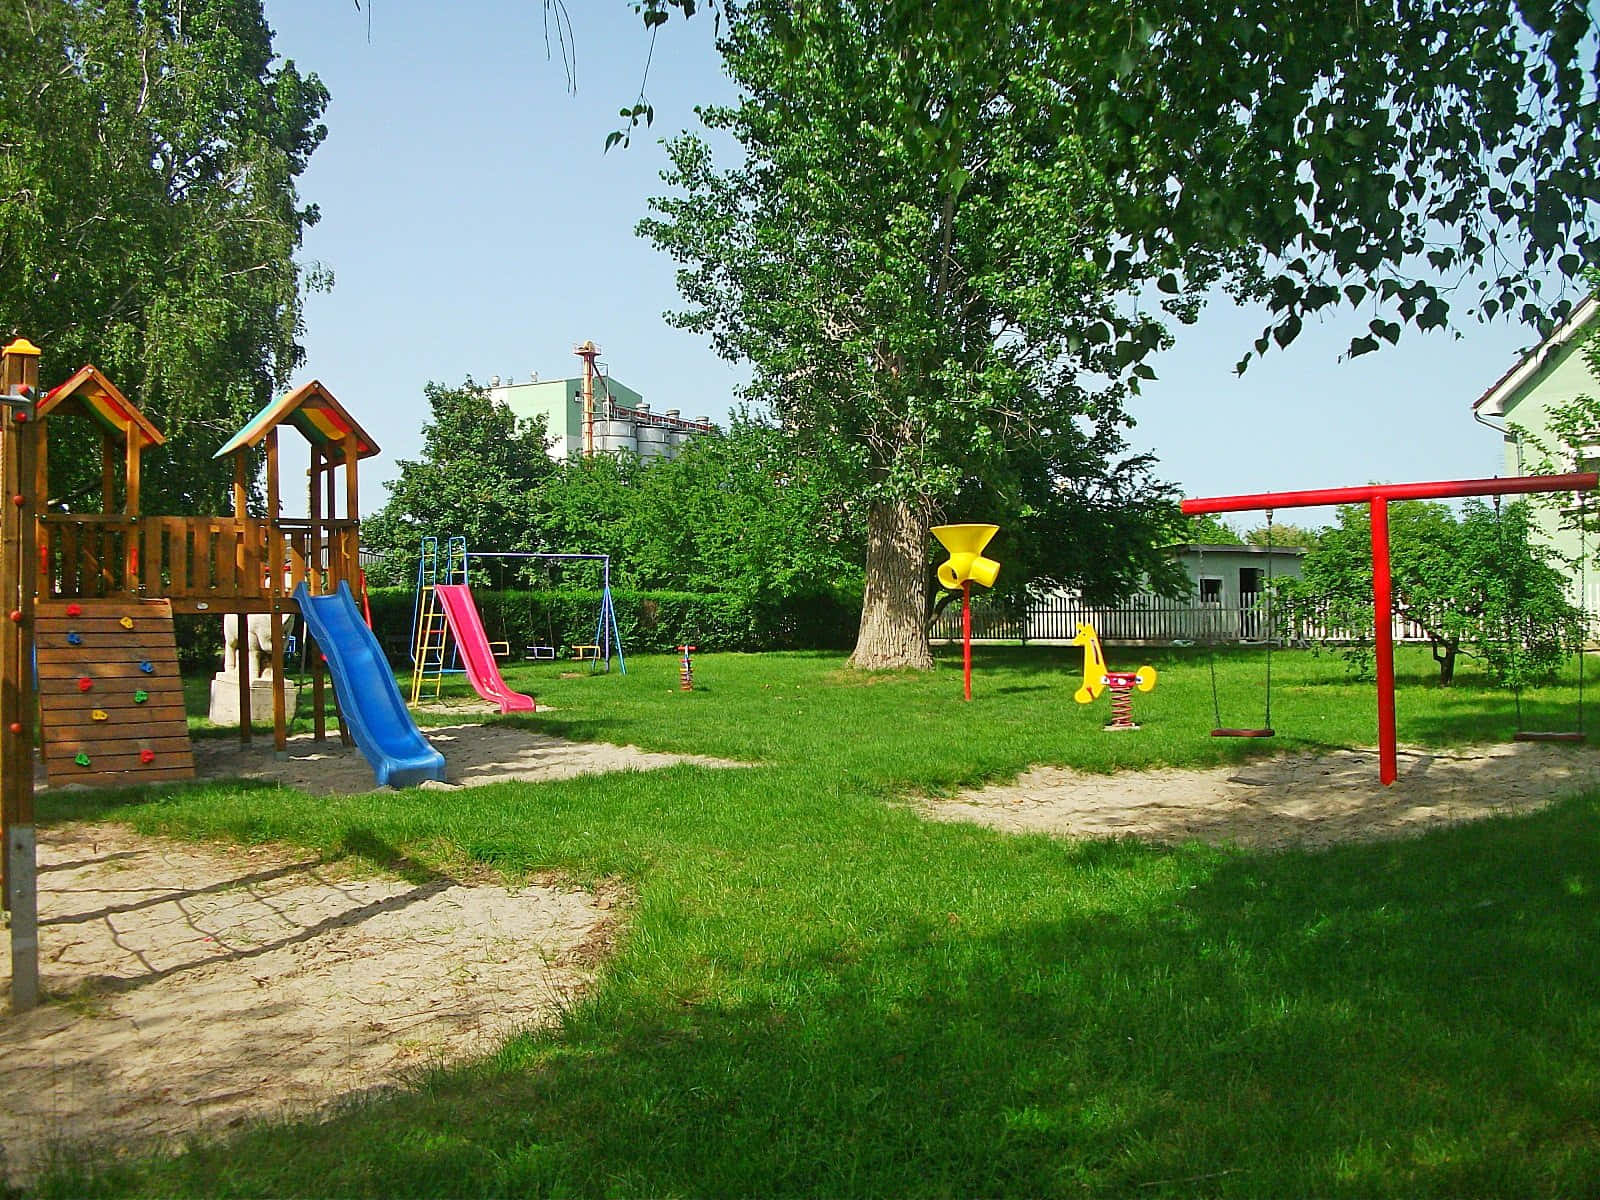 Colorful playground equipment in a vibrant park setting